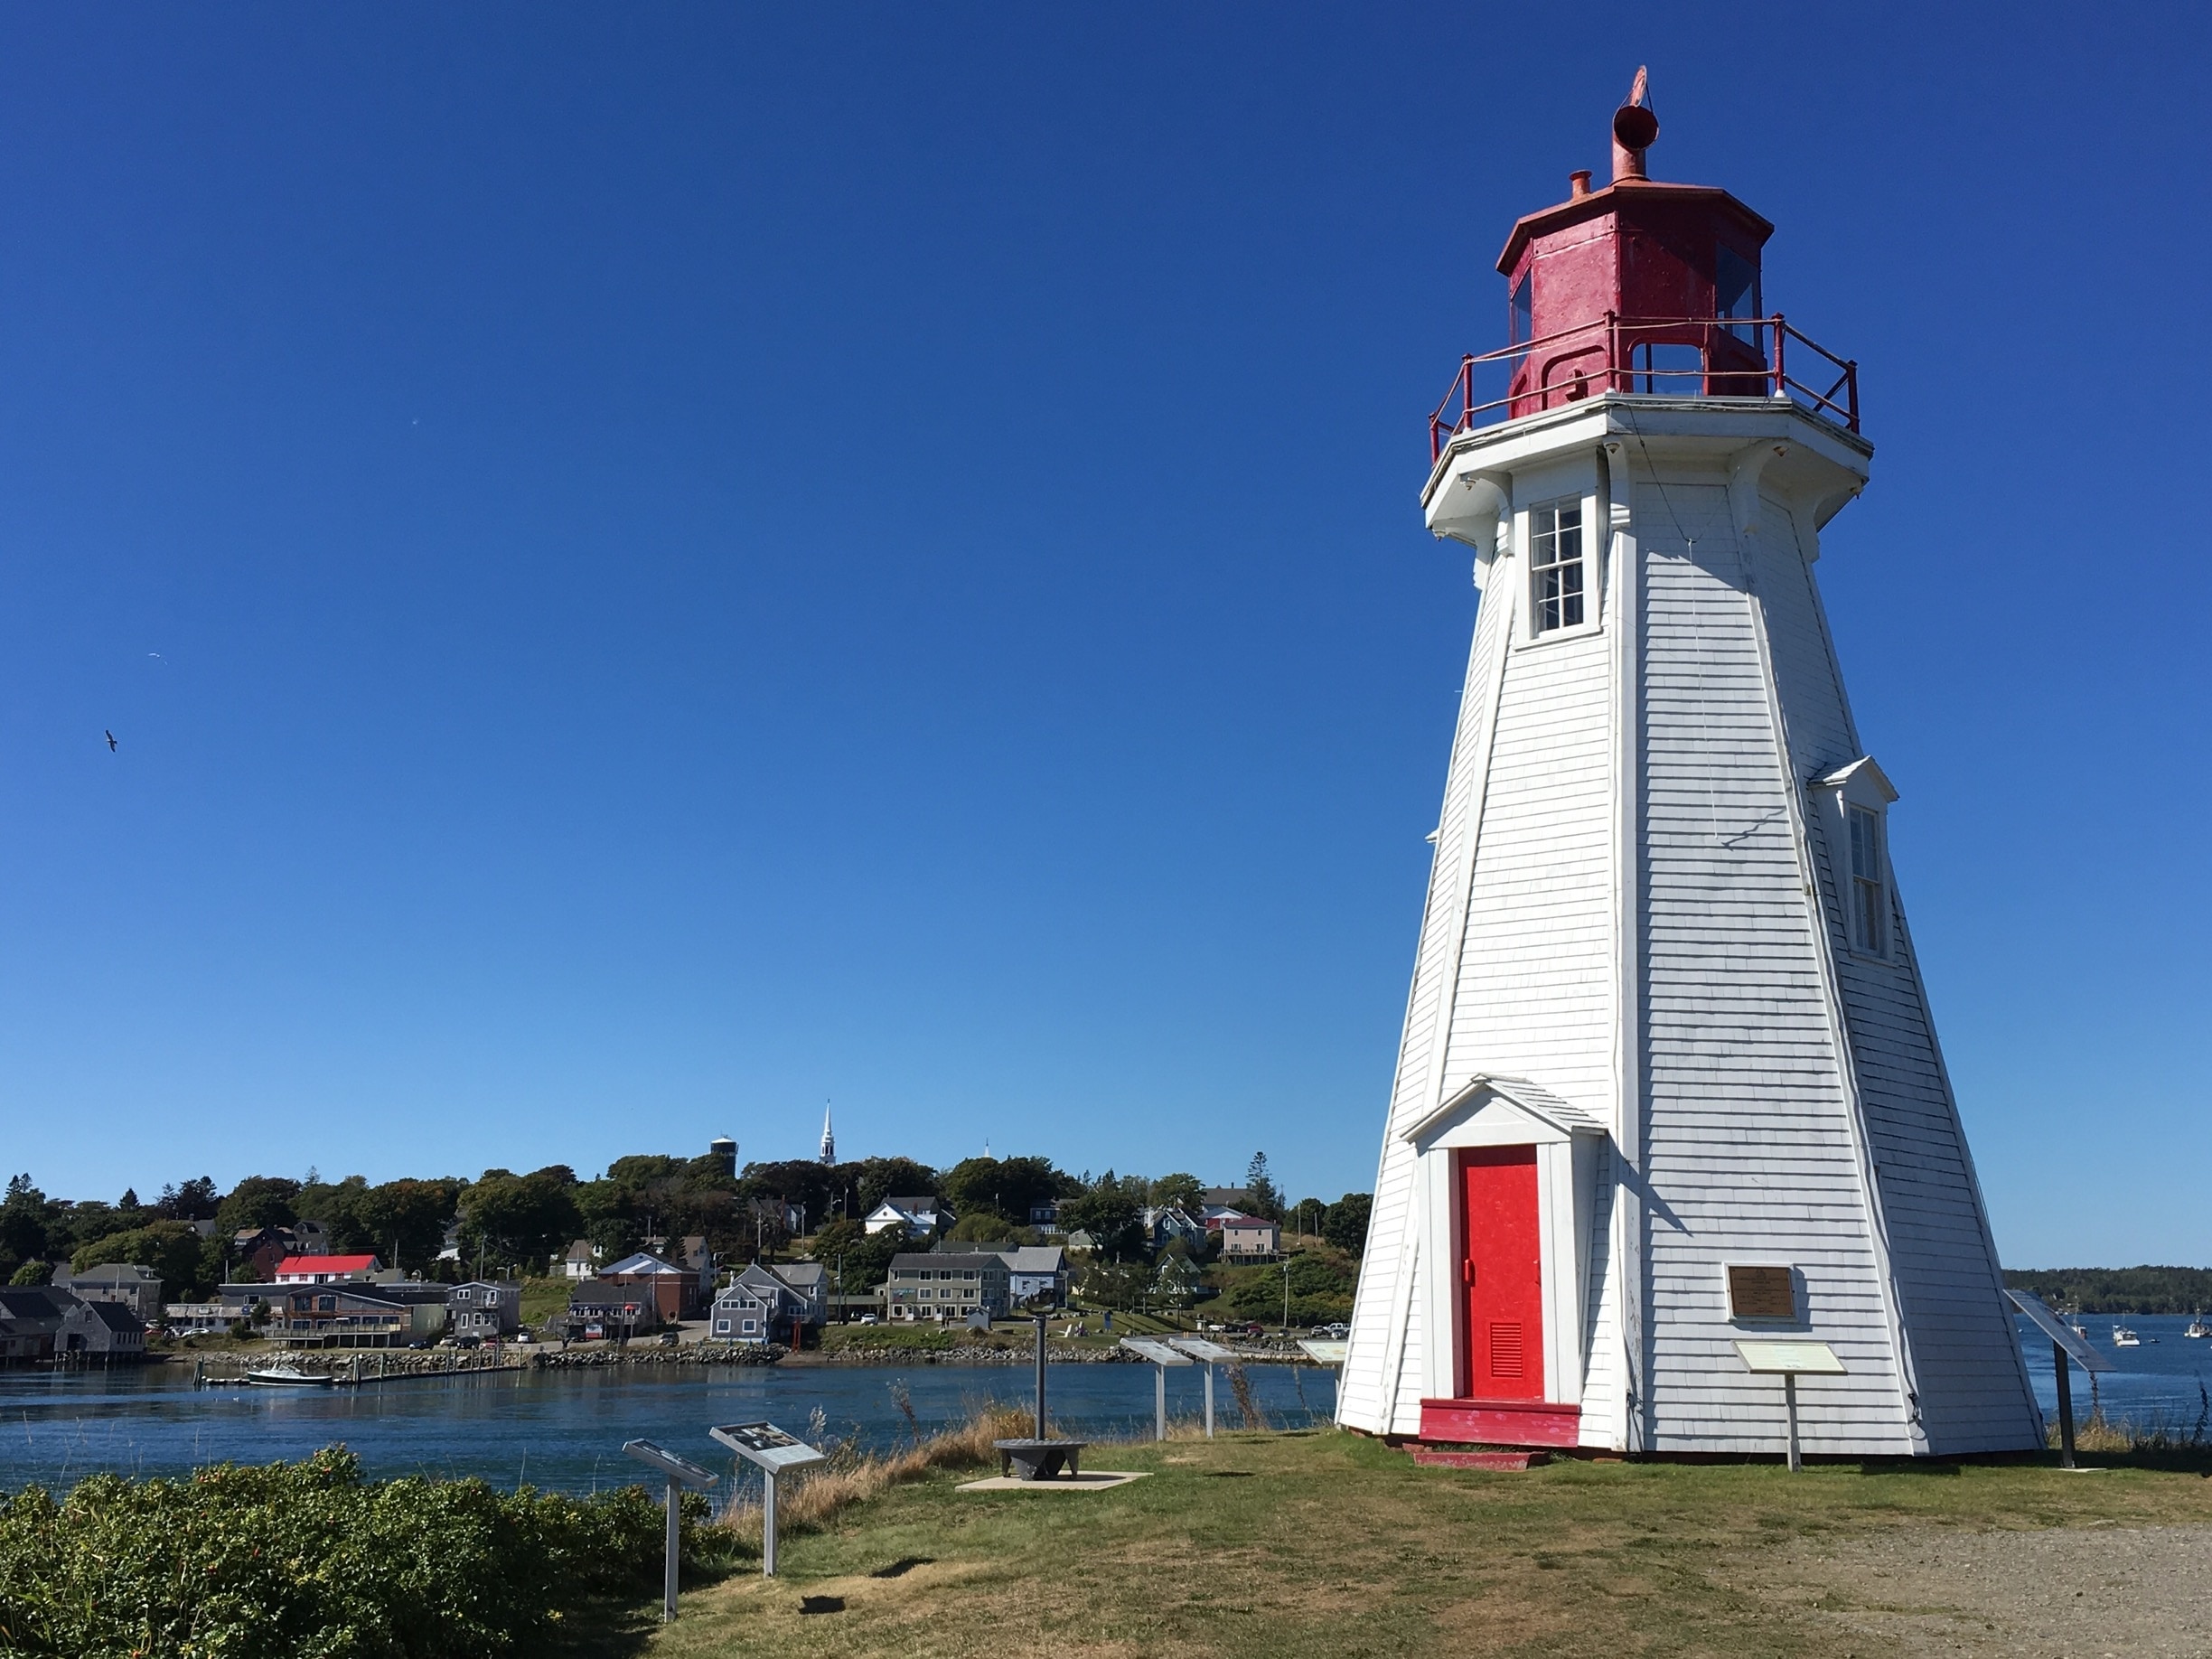 Traveled to Campobello Island to see FDR’s family retreat home and was treated with a stop at Mulholland Port Lighthouse.